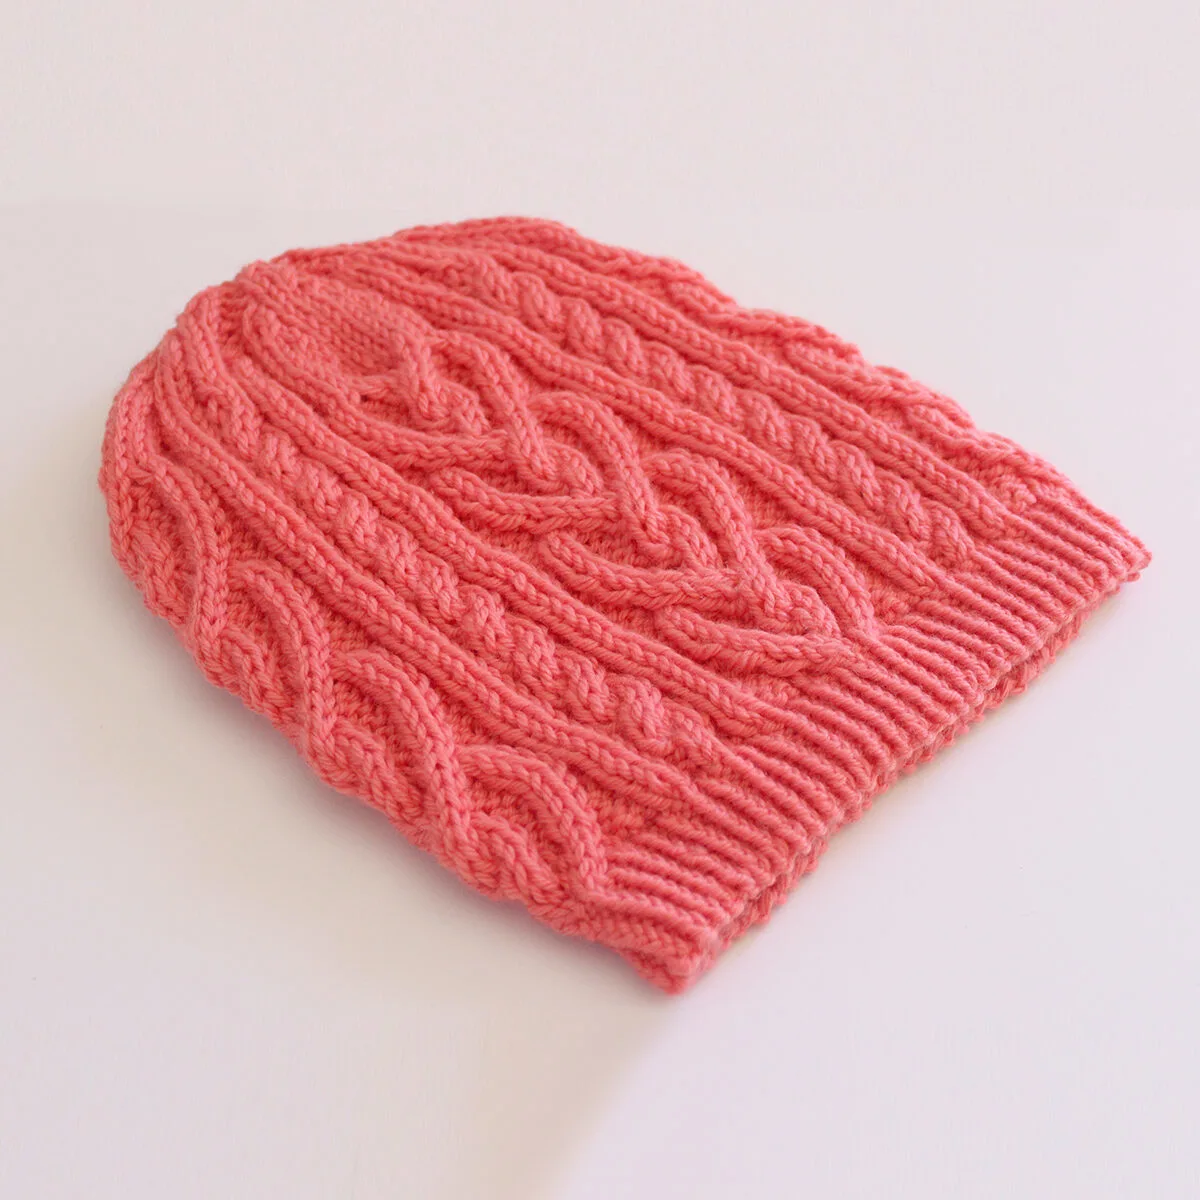 Textured detail of knitted Heart Cable Hat.